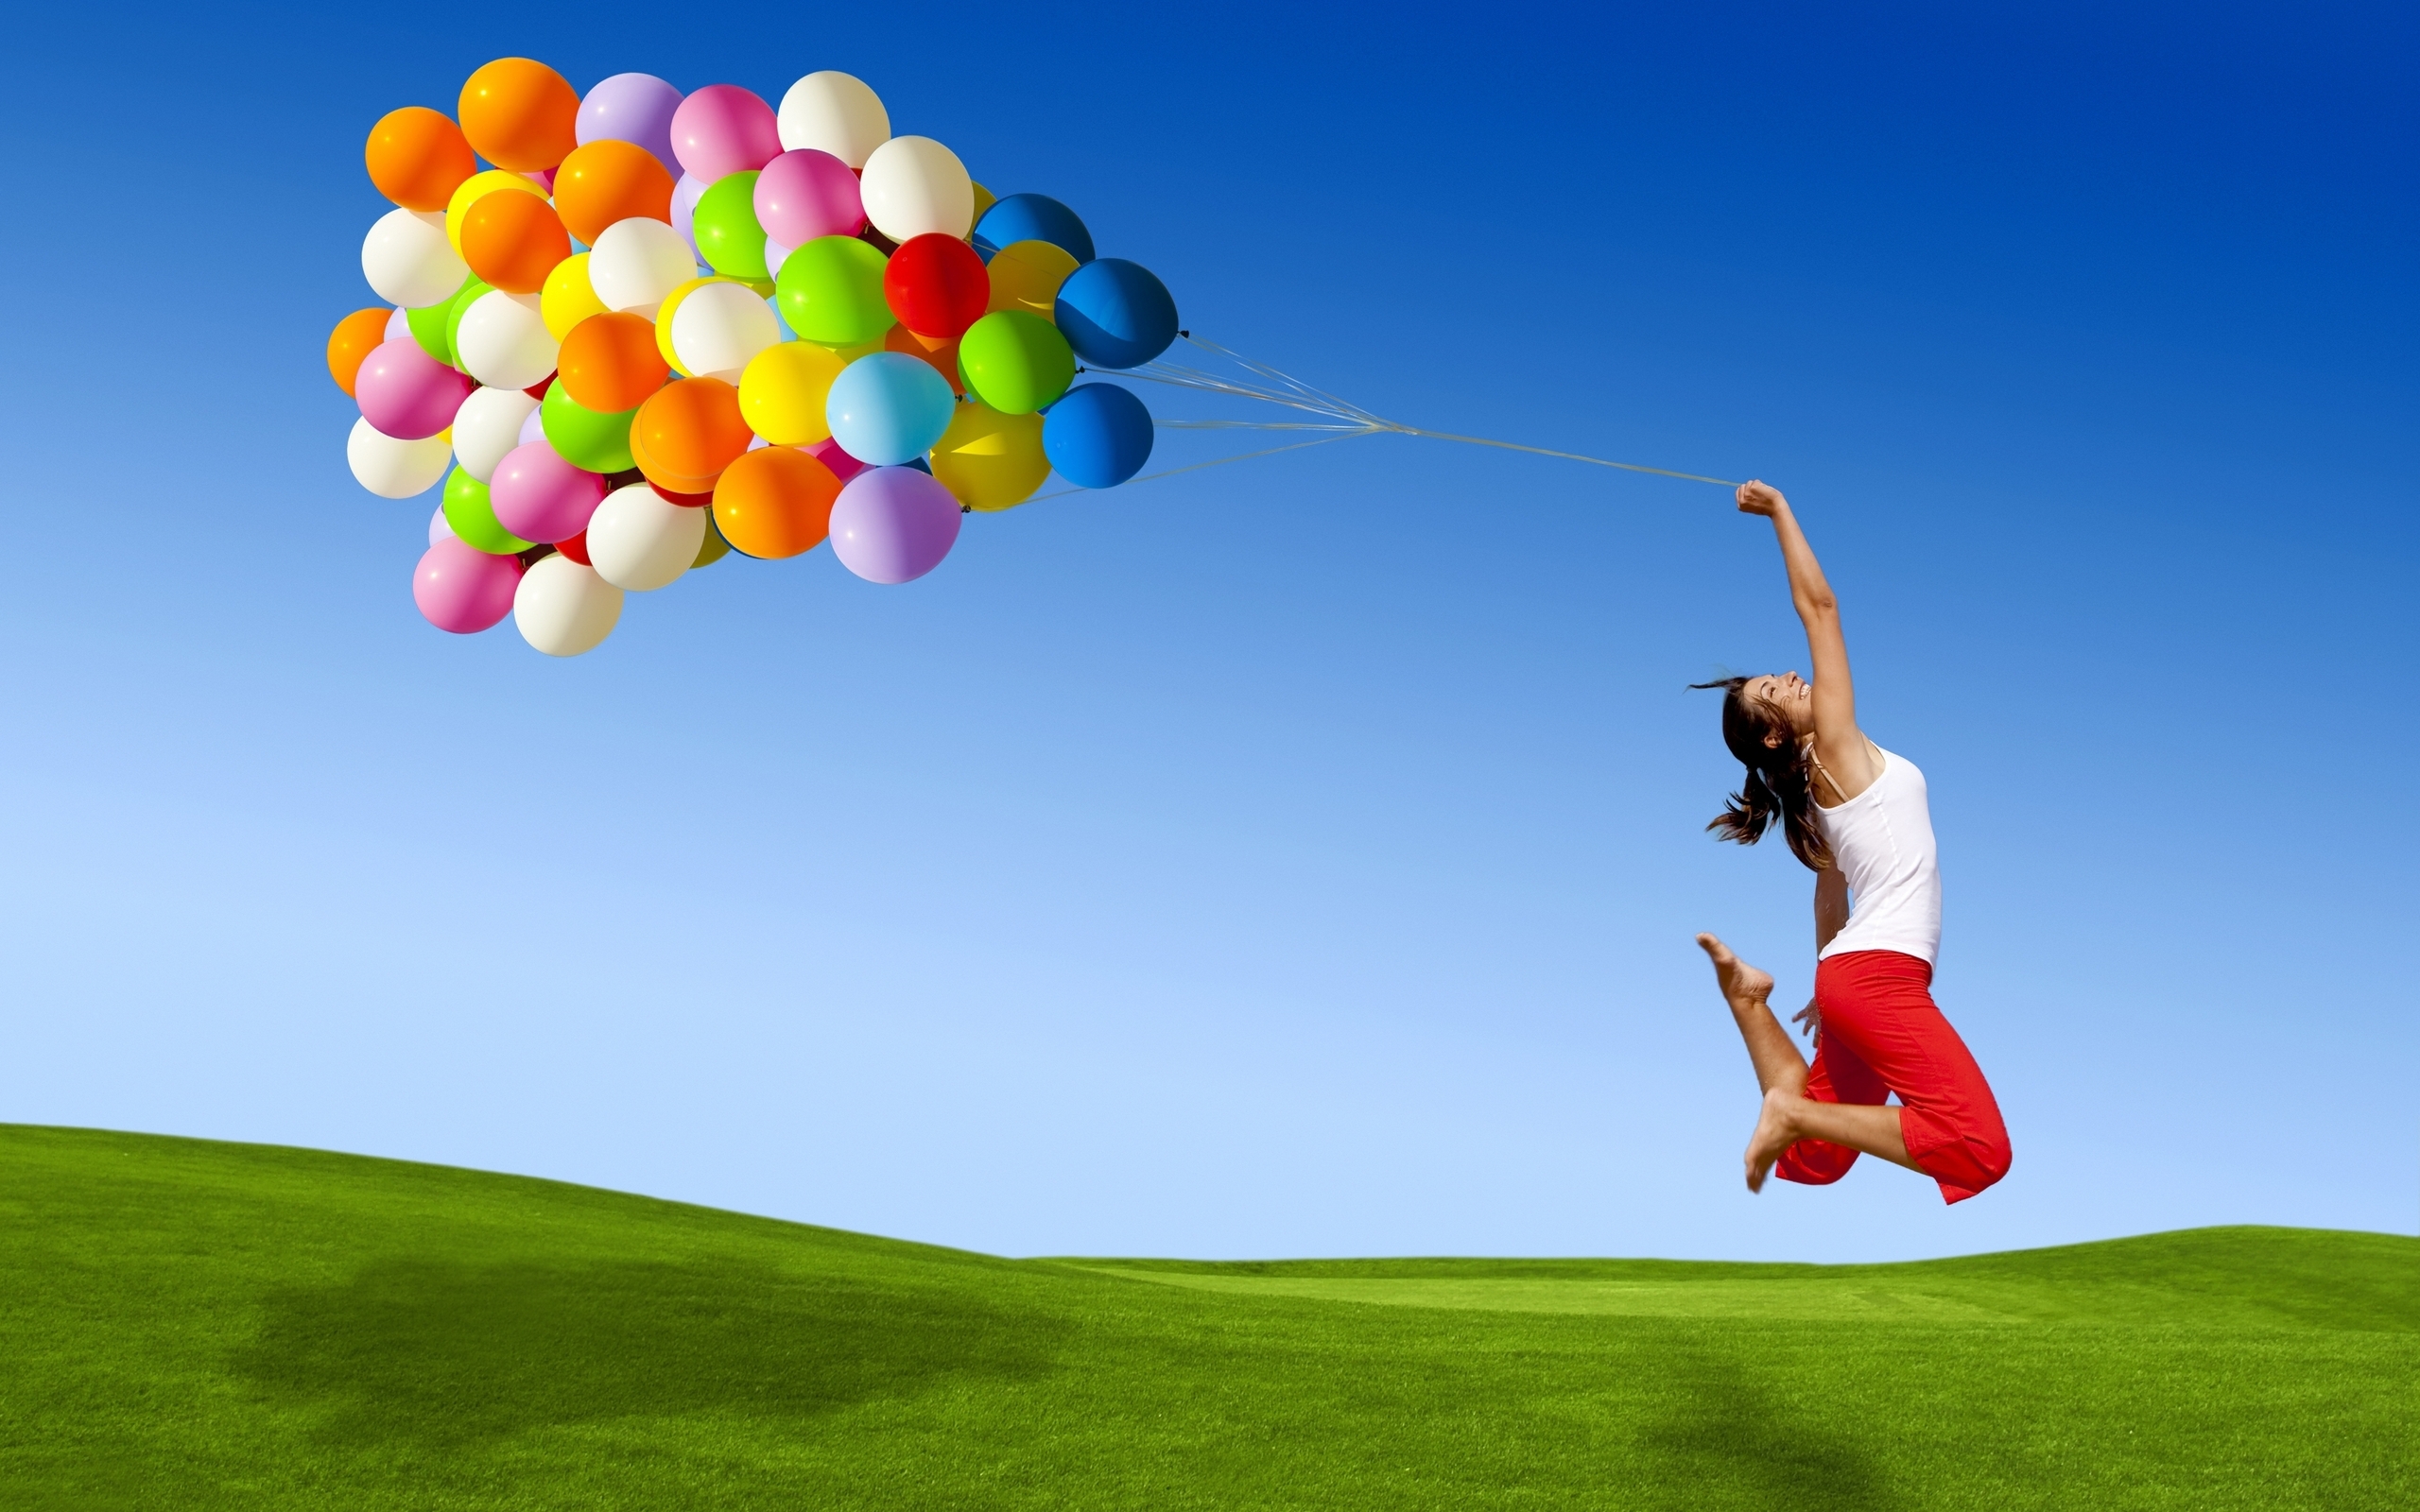 hd wallpapers for laptop,people in nature,sky,fun,balloon,happy